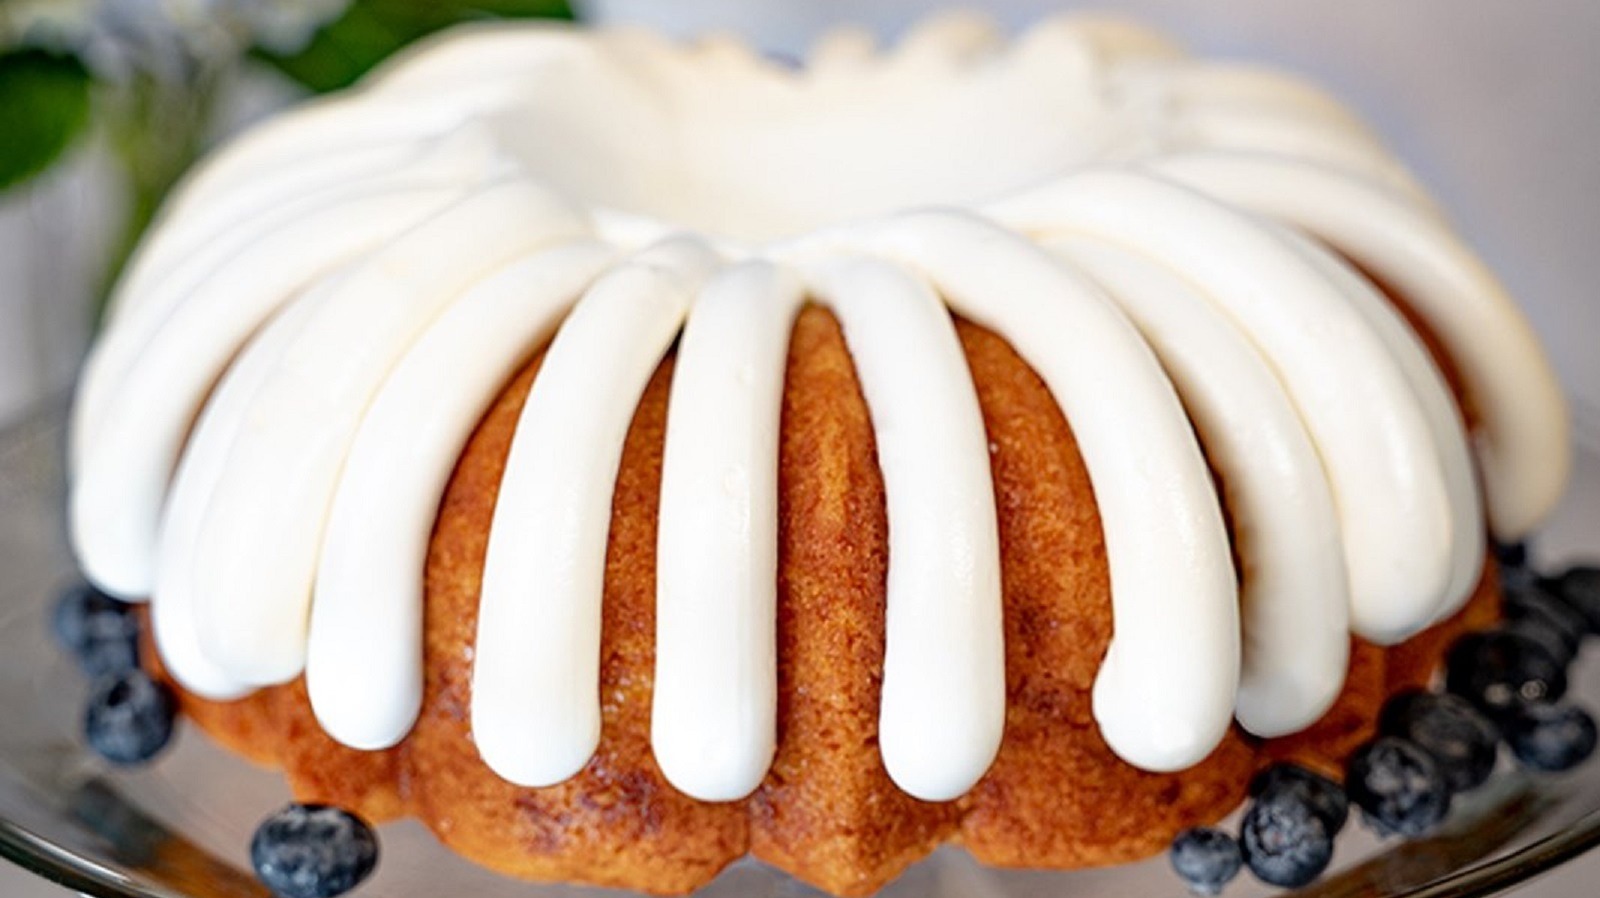 Can You Freeze Nothing Bundt Cakes? - Foods Guy